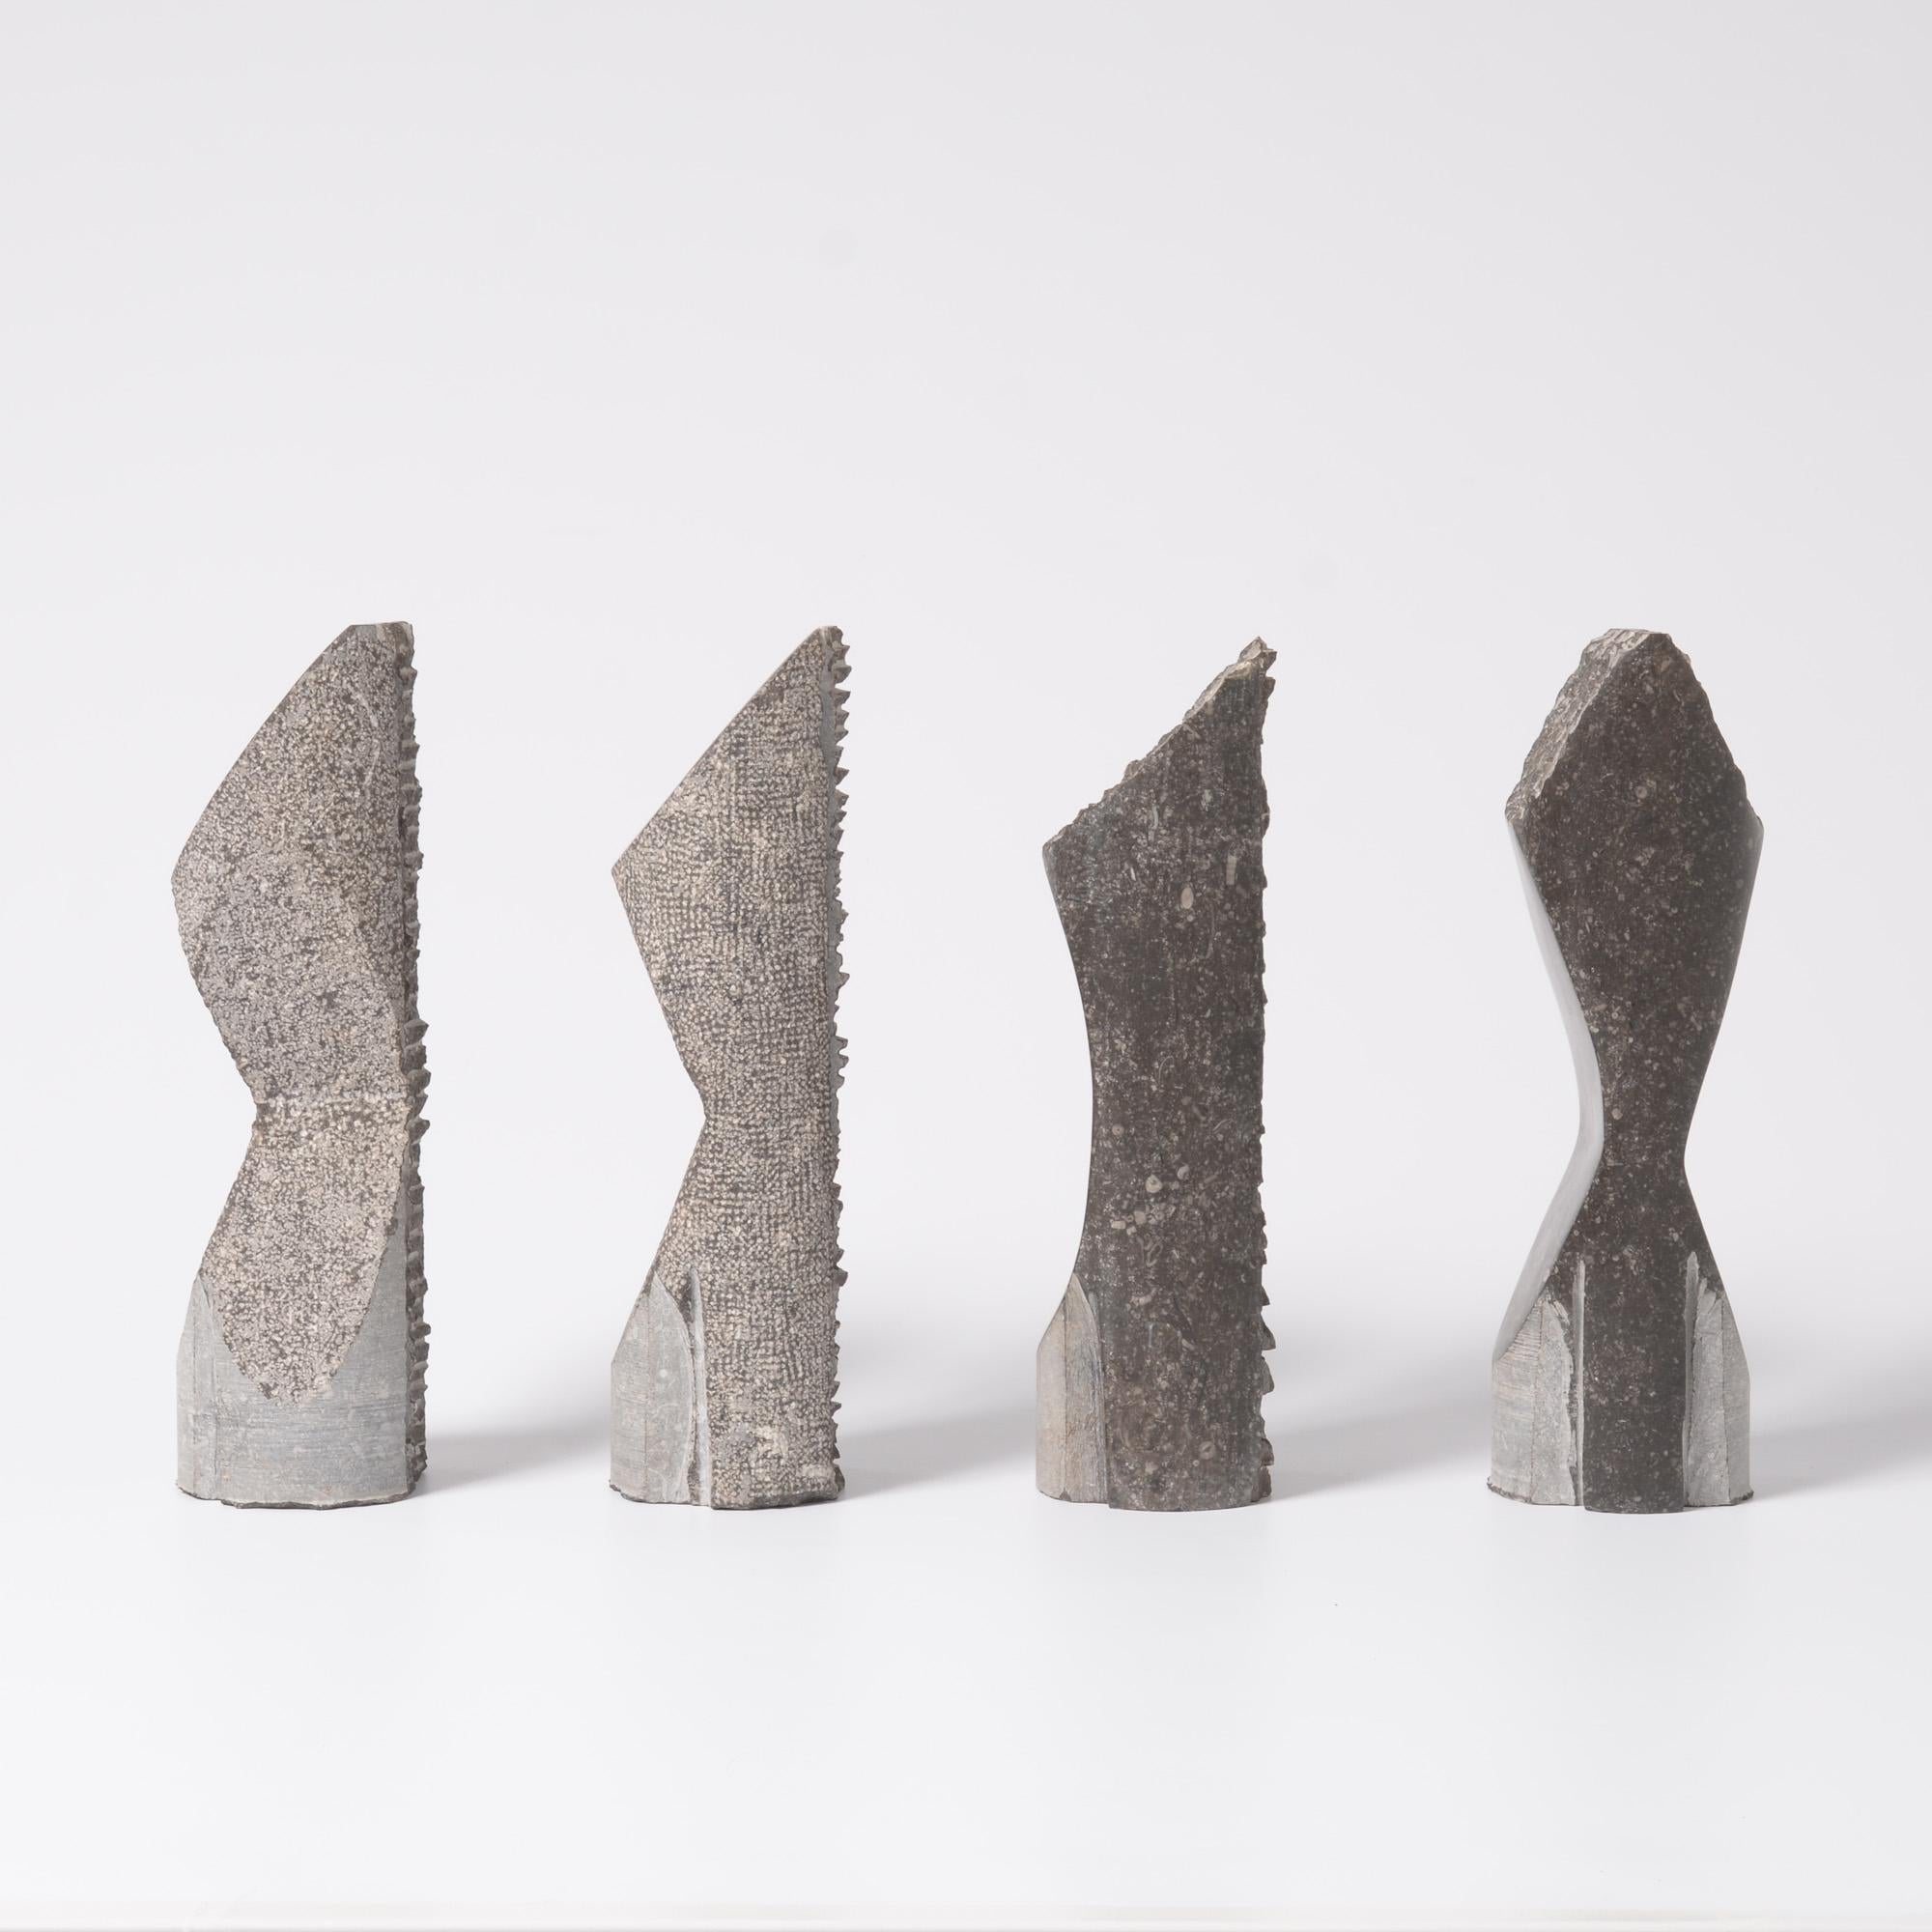 These column sculptures are created by the Belgian sculptor Jorg Van Daele (°1966).
The sculptures are made of Belgian bluestone.
On the one hand, each sculpture is an individual creation, with different shapes and textures. On the other hand, the